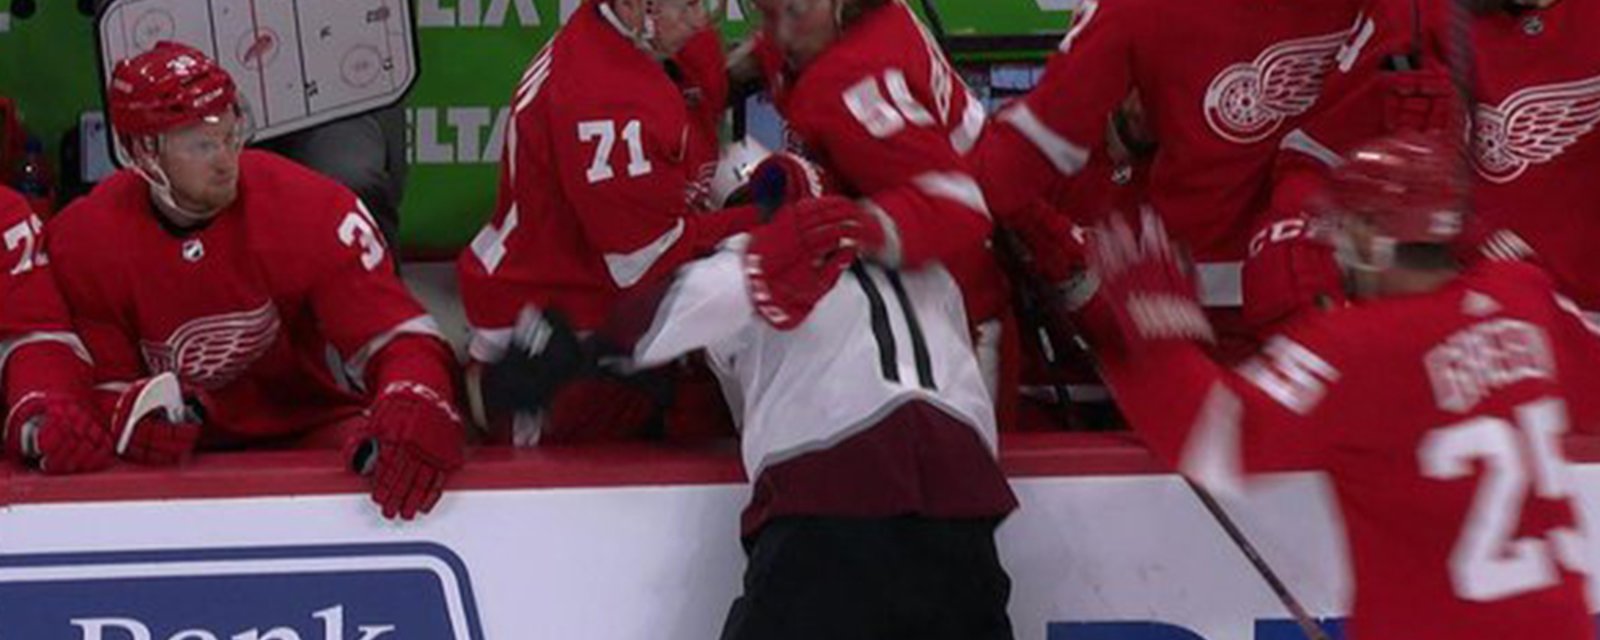 Breaking: NHL suspends Bertuzzi for unsportsmanlike conduct